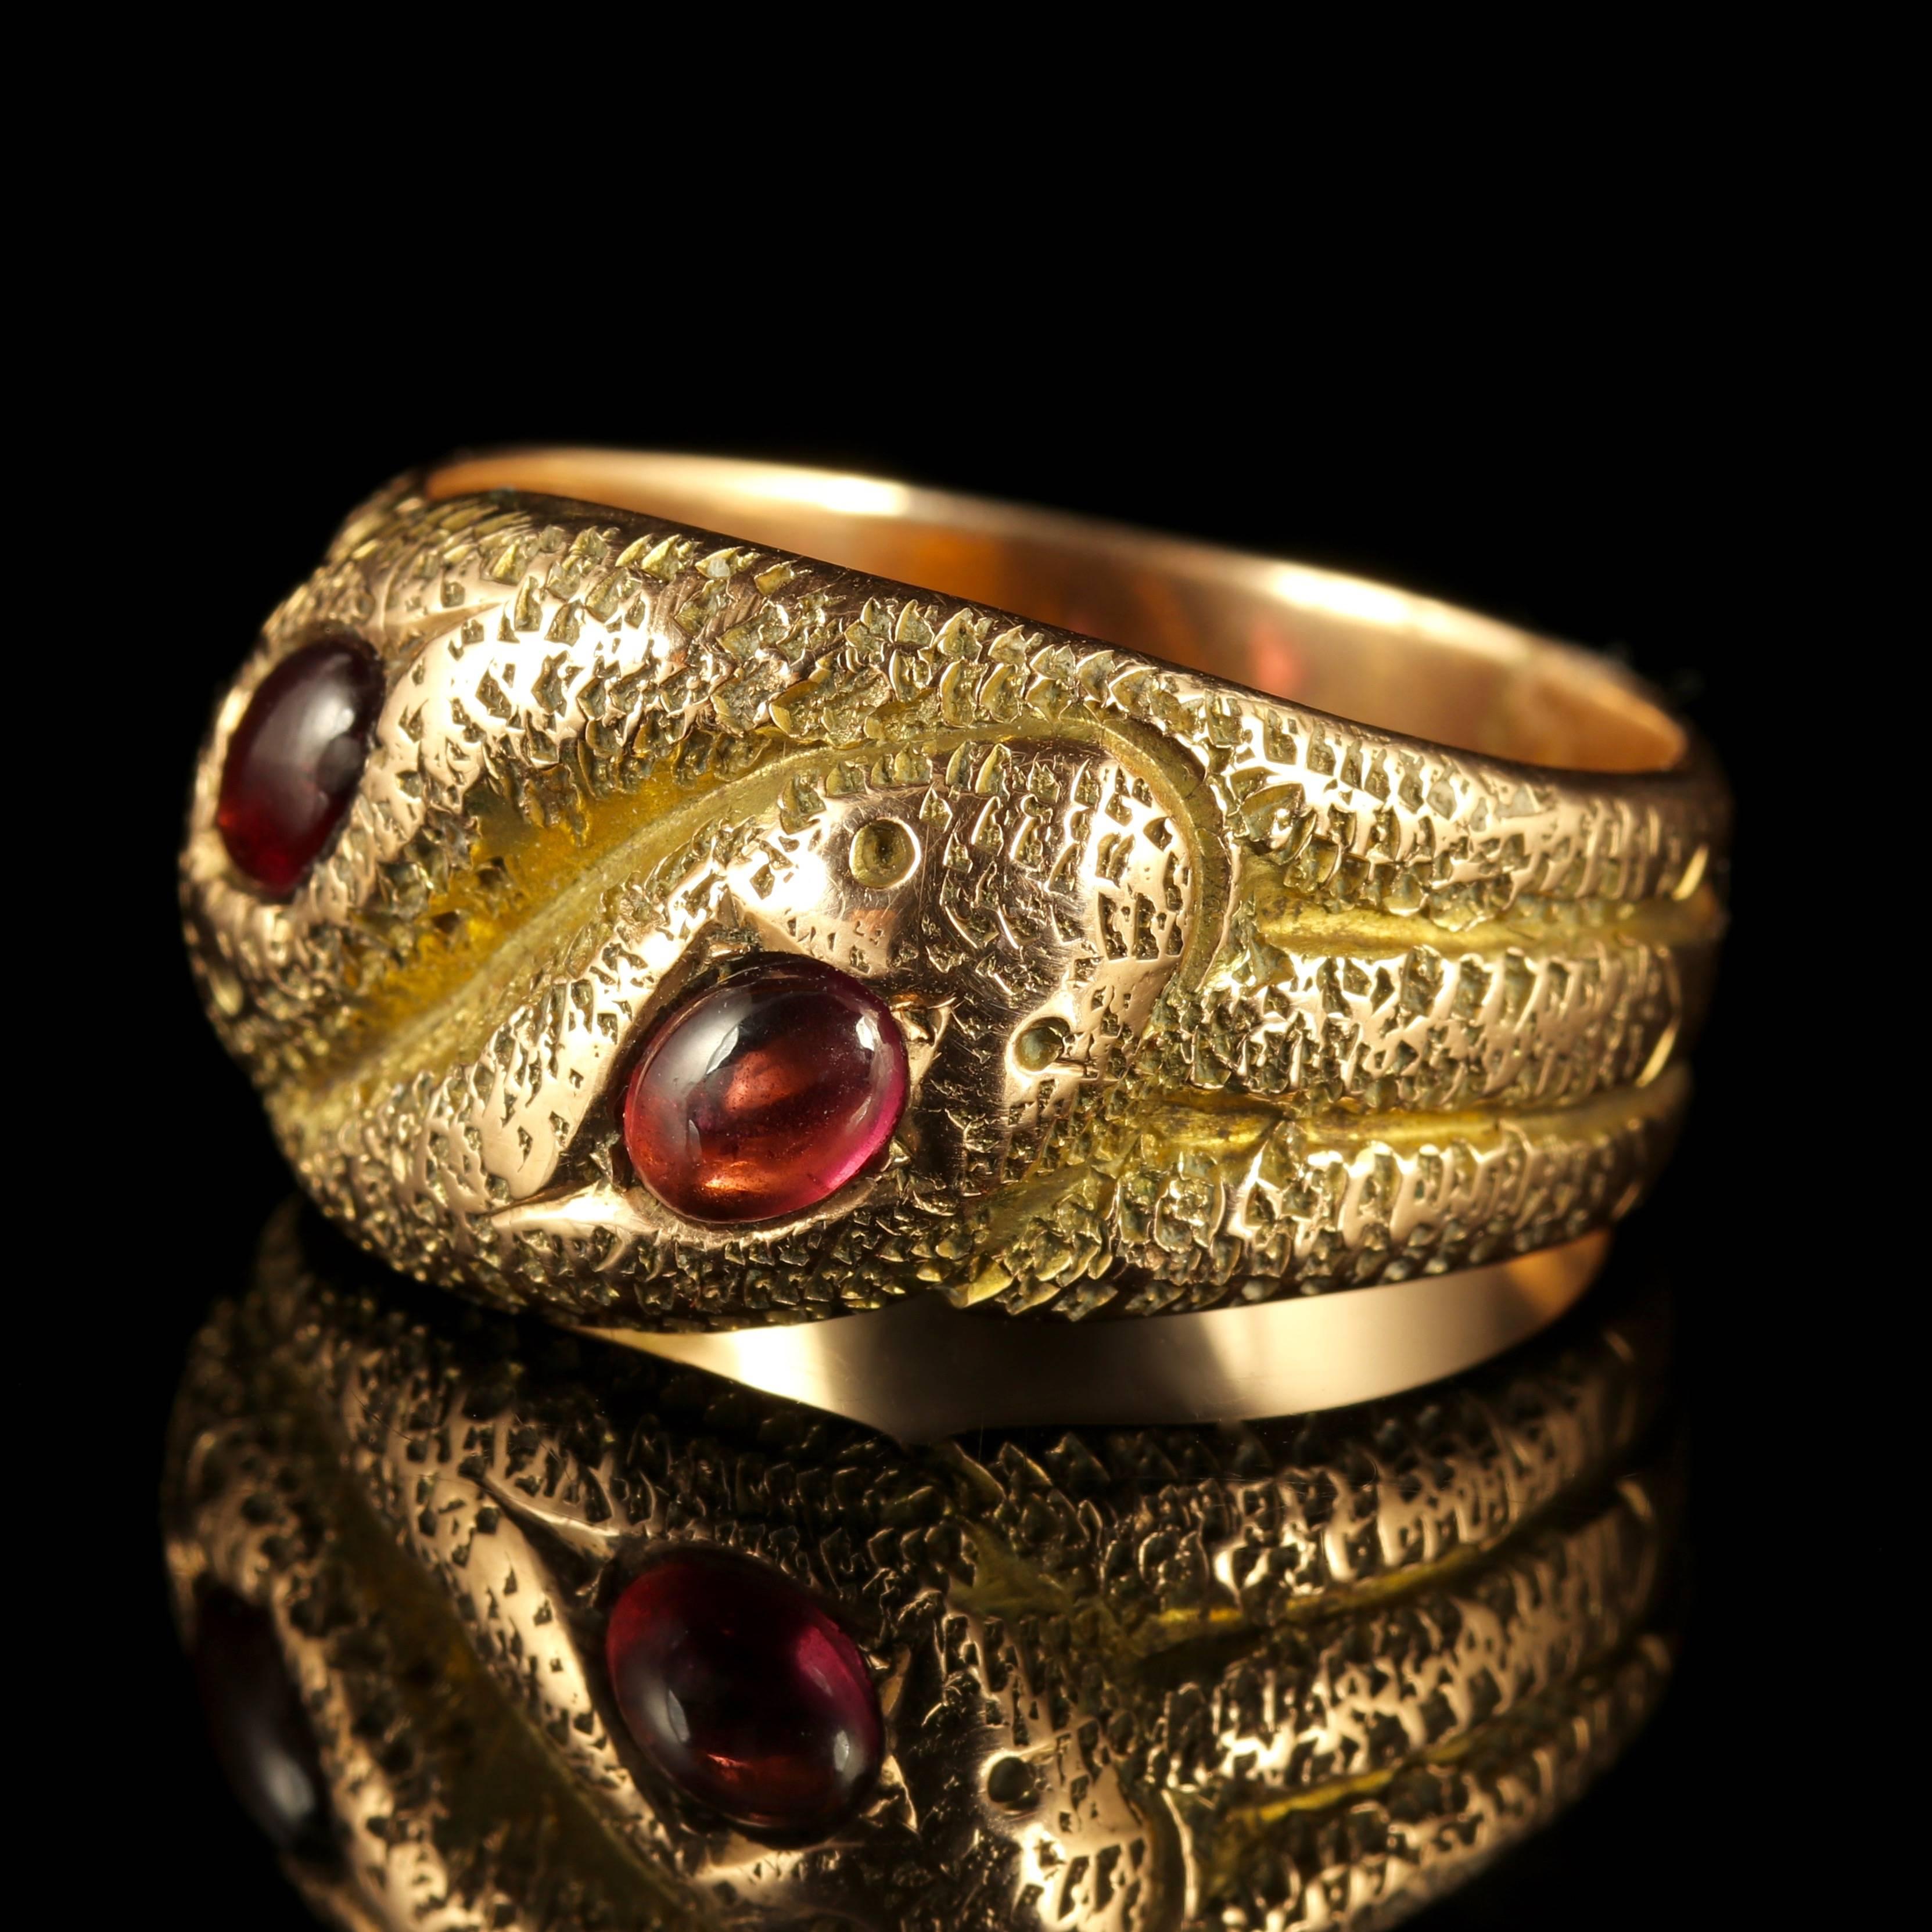 This genuine Art Deco 9ct Yellow Gold triple coiled snake ring is fully hallmarked Chester 1920.

Set with Almandine Garnet stones, cabochon cut and crowned on top of each serpents head.

Almandine Garnets have a lovely rich red hue with a flash of